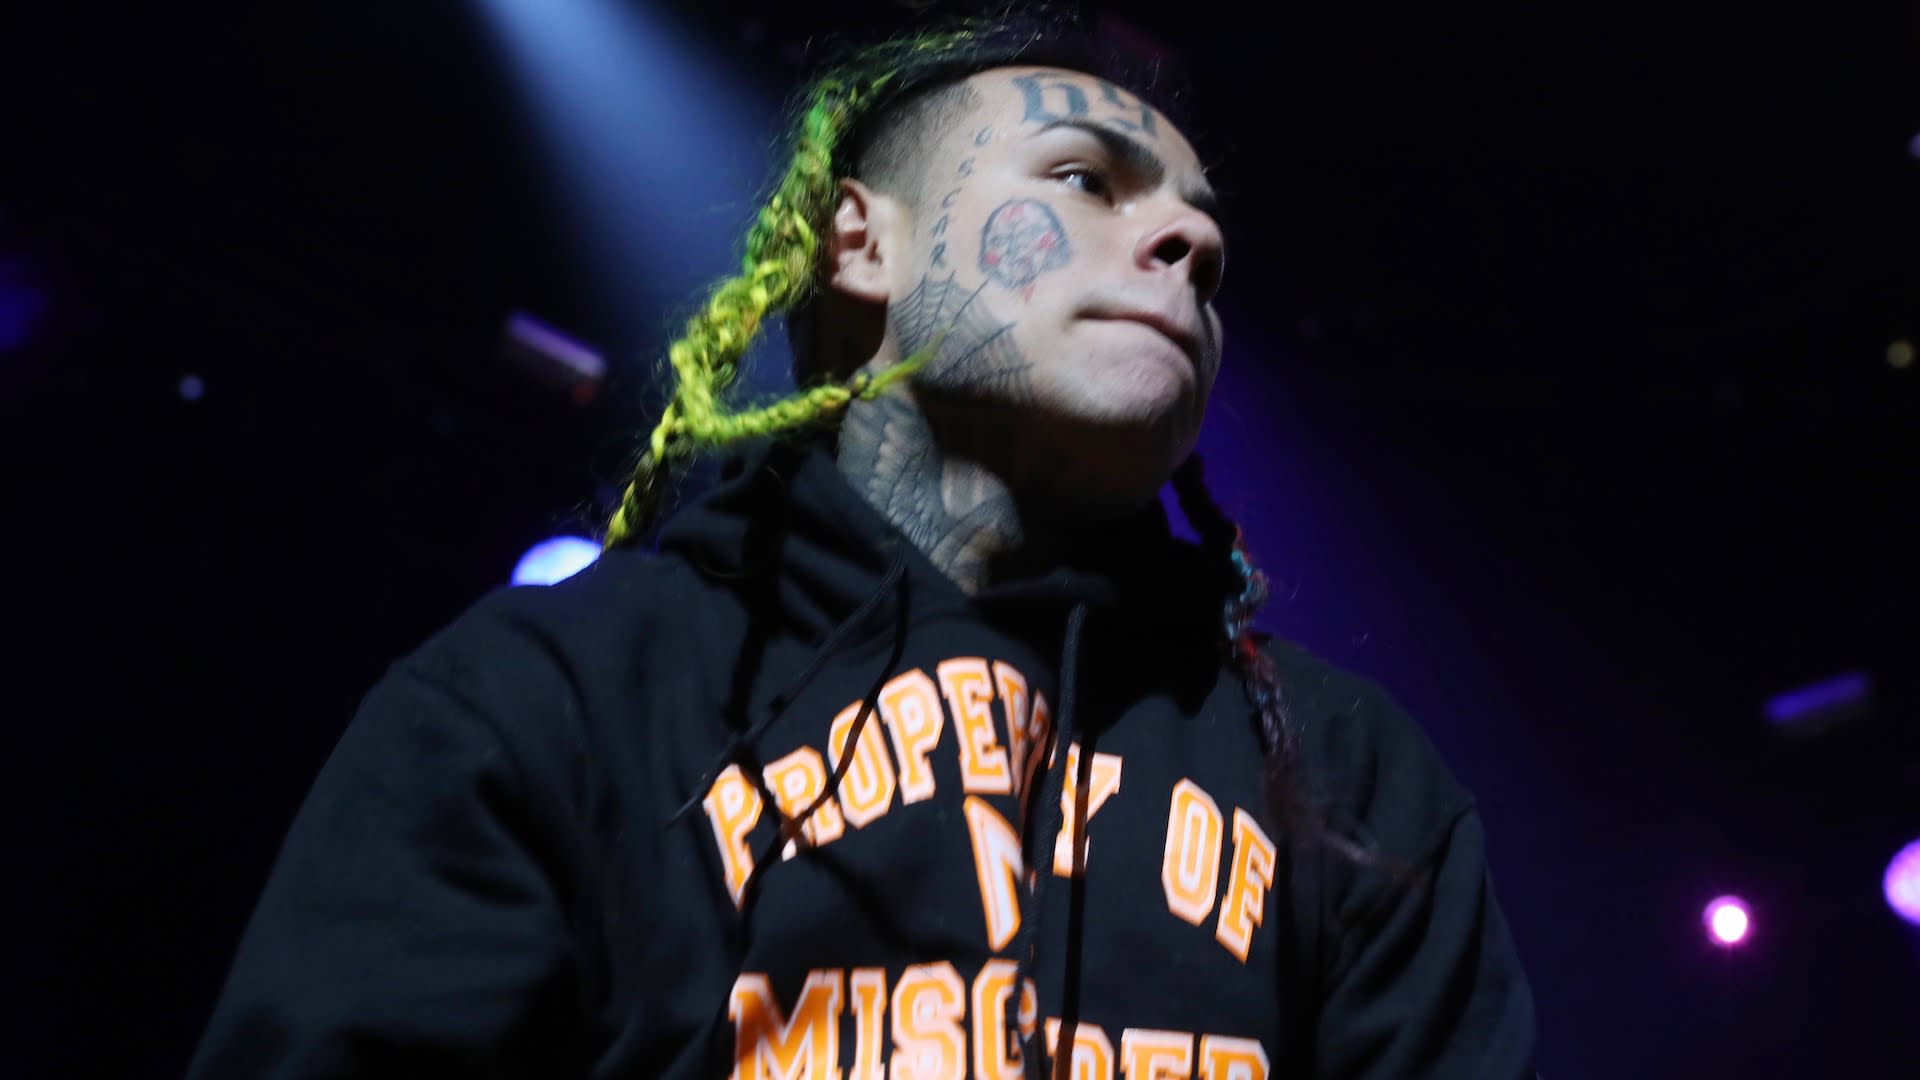 6ix9ine and Lil Reese engage in a heated exchange on Instagram Live